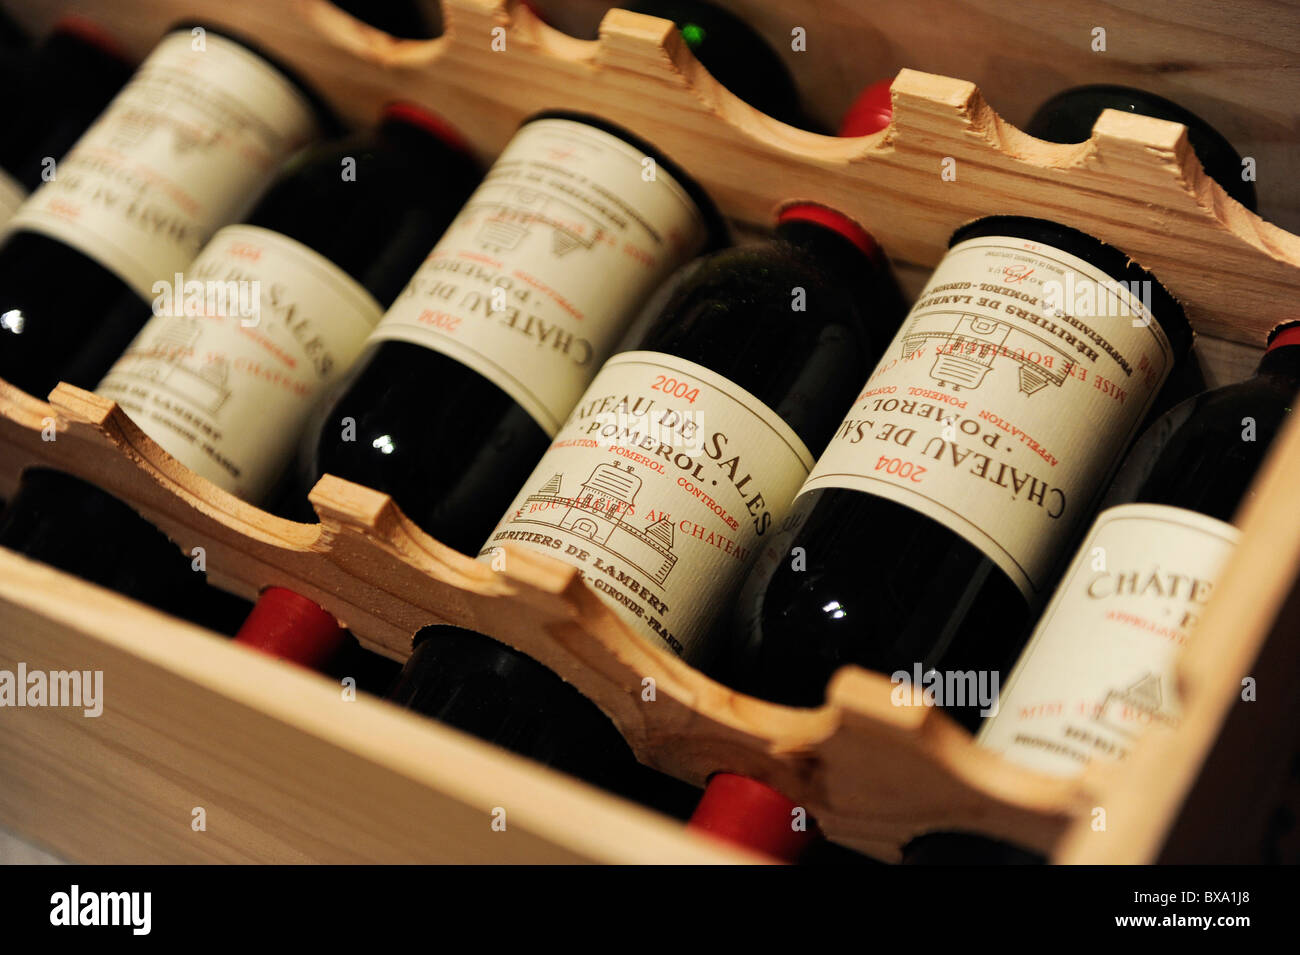 A crate of French wine bottles of Bordeaux Stock Photo